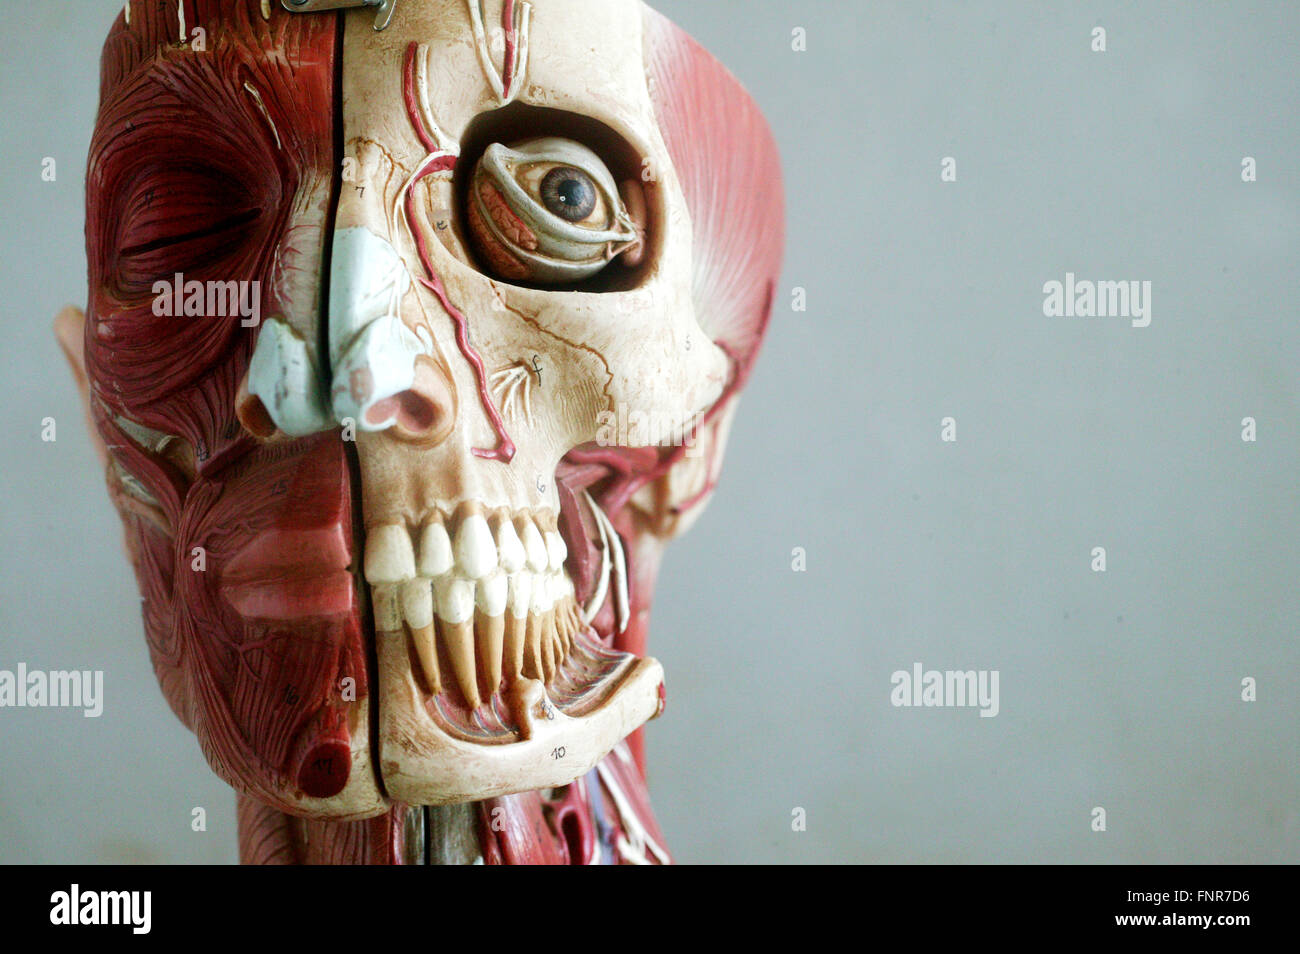 Anatomical model showing the skeletal and muscular structures of the face. Stock Photo